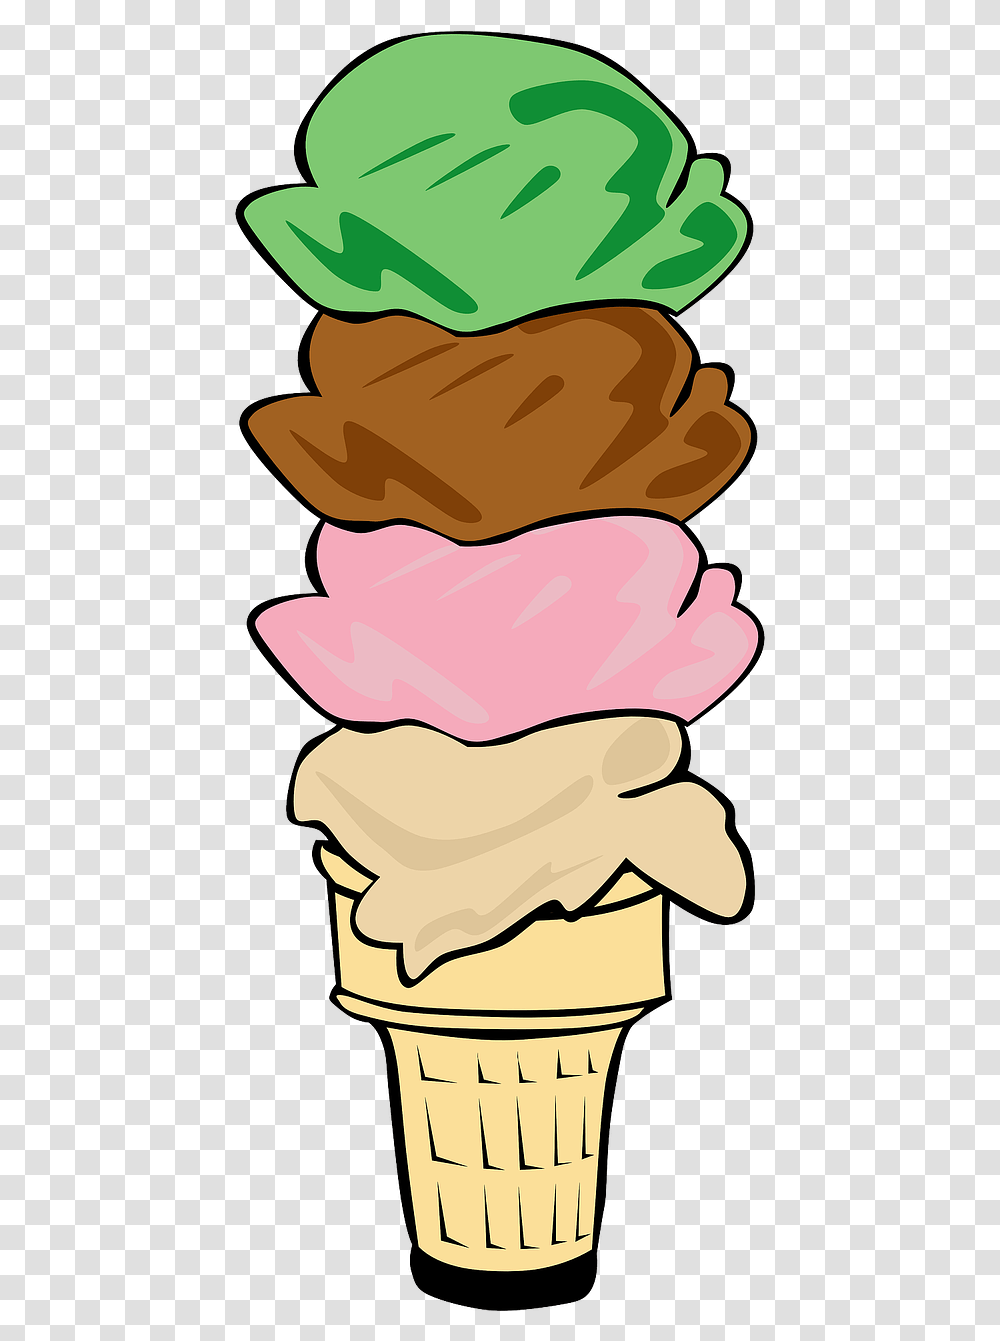 Cartoonclip Ice Cream Cone Clip Art, Hand, Food, Sweets, Confectionery Transparent Png